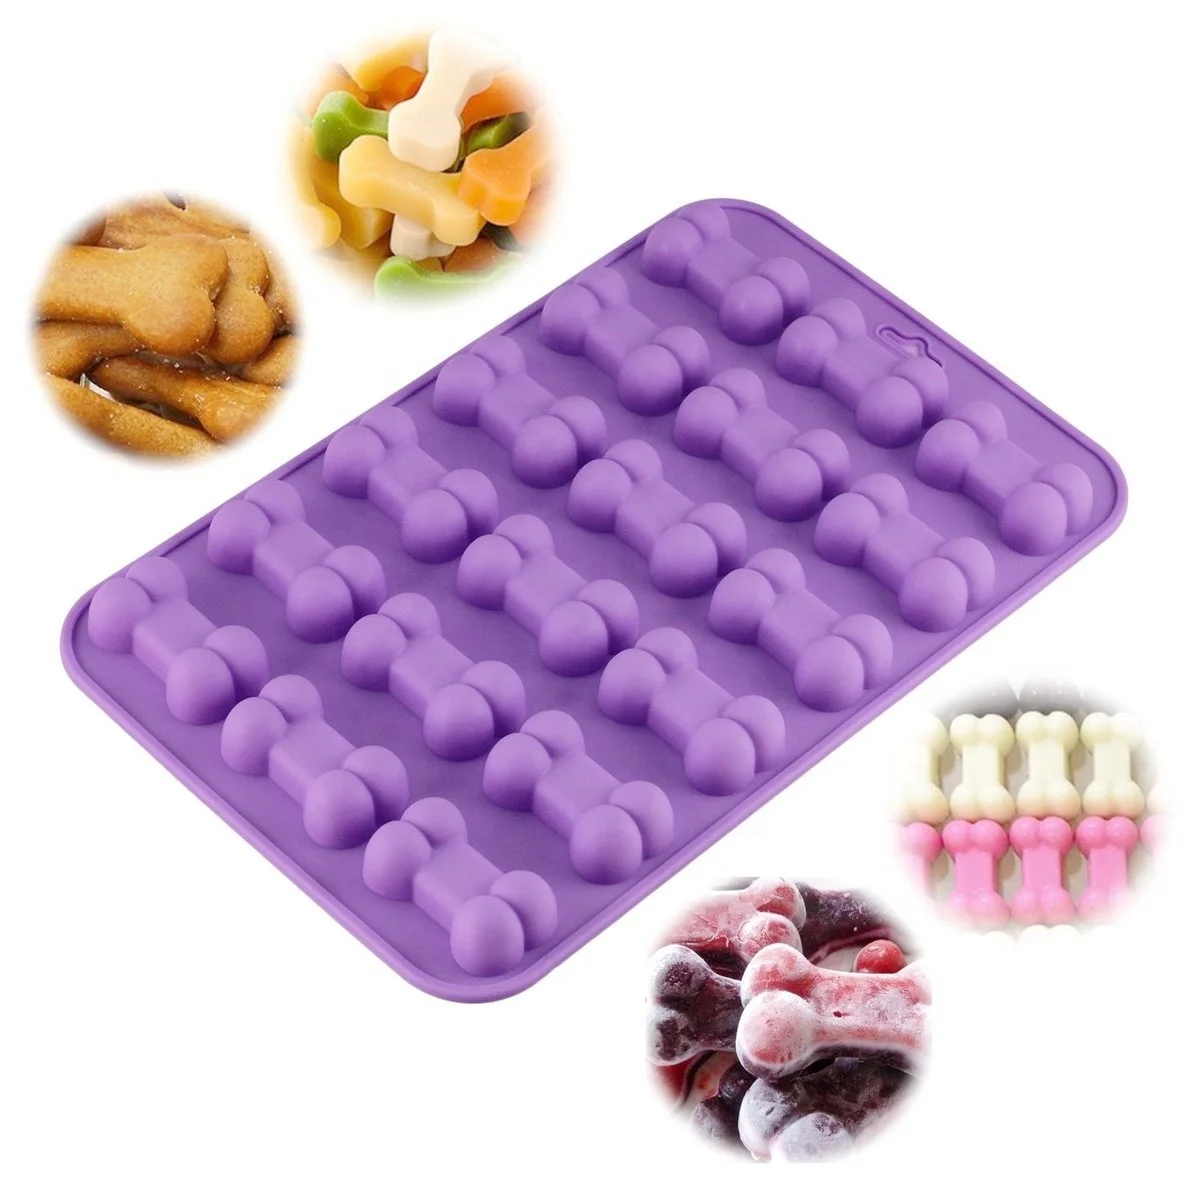 

18 Units 3D Sugar Fondant Cake Dog Bone Form Cutter Cookie Chocolate Silicone Molds Decorating Tools Kitchen Pastry Baking Molds, As shown